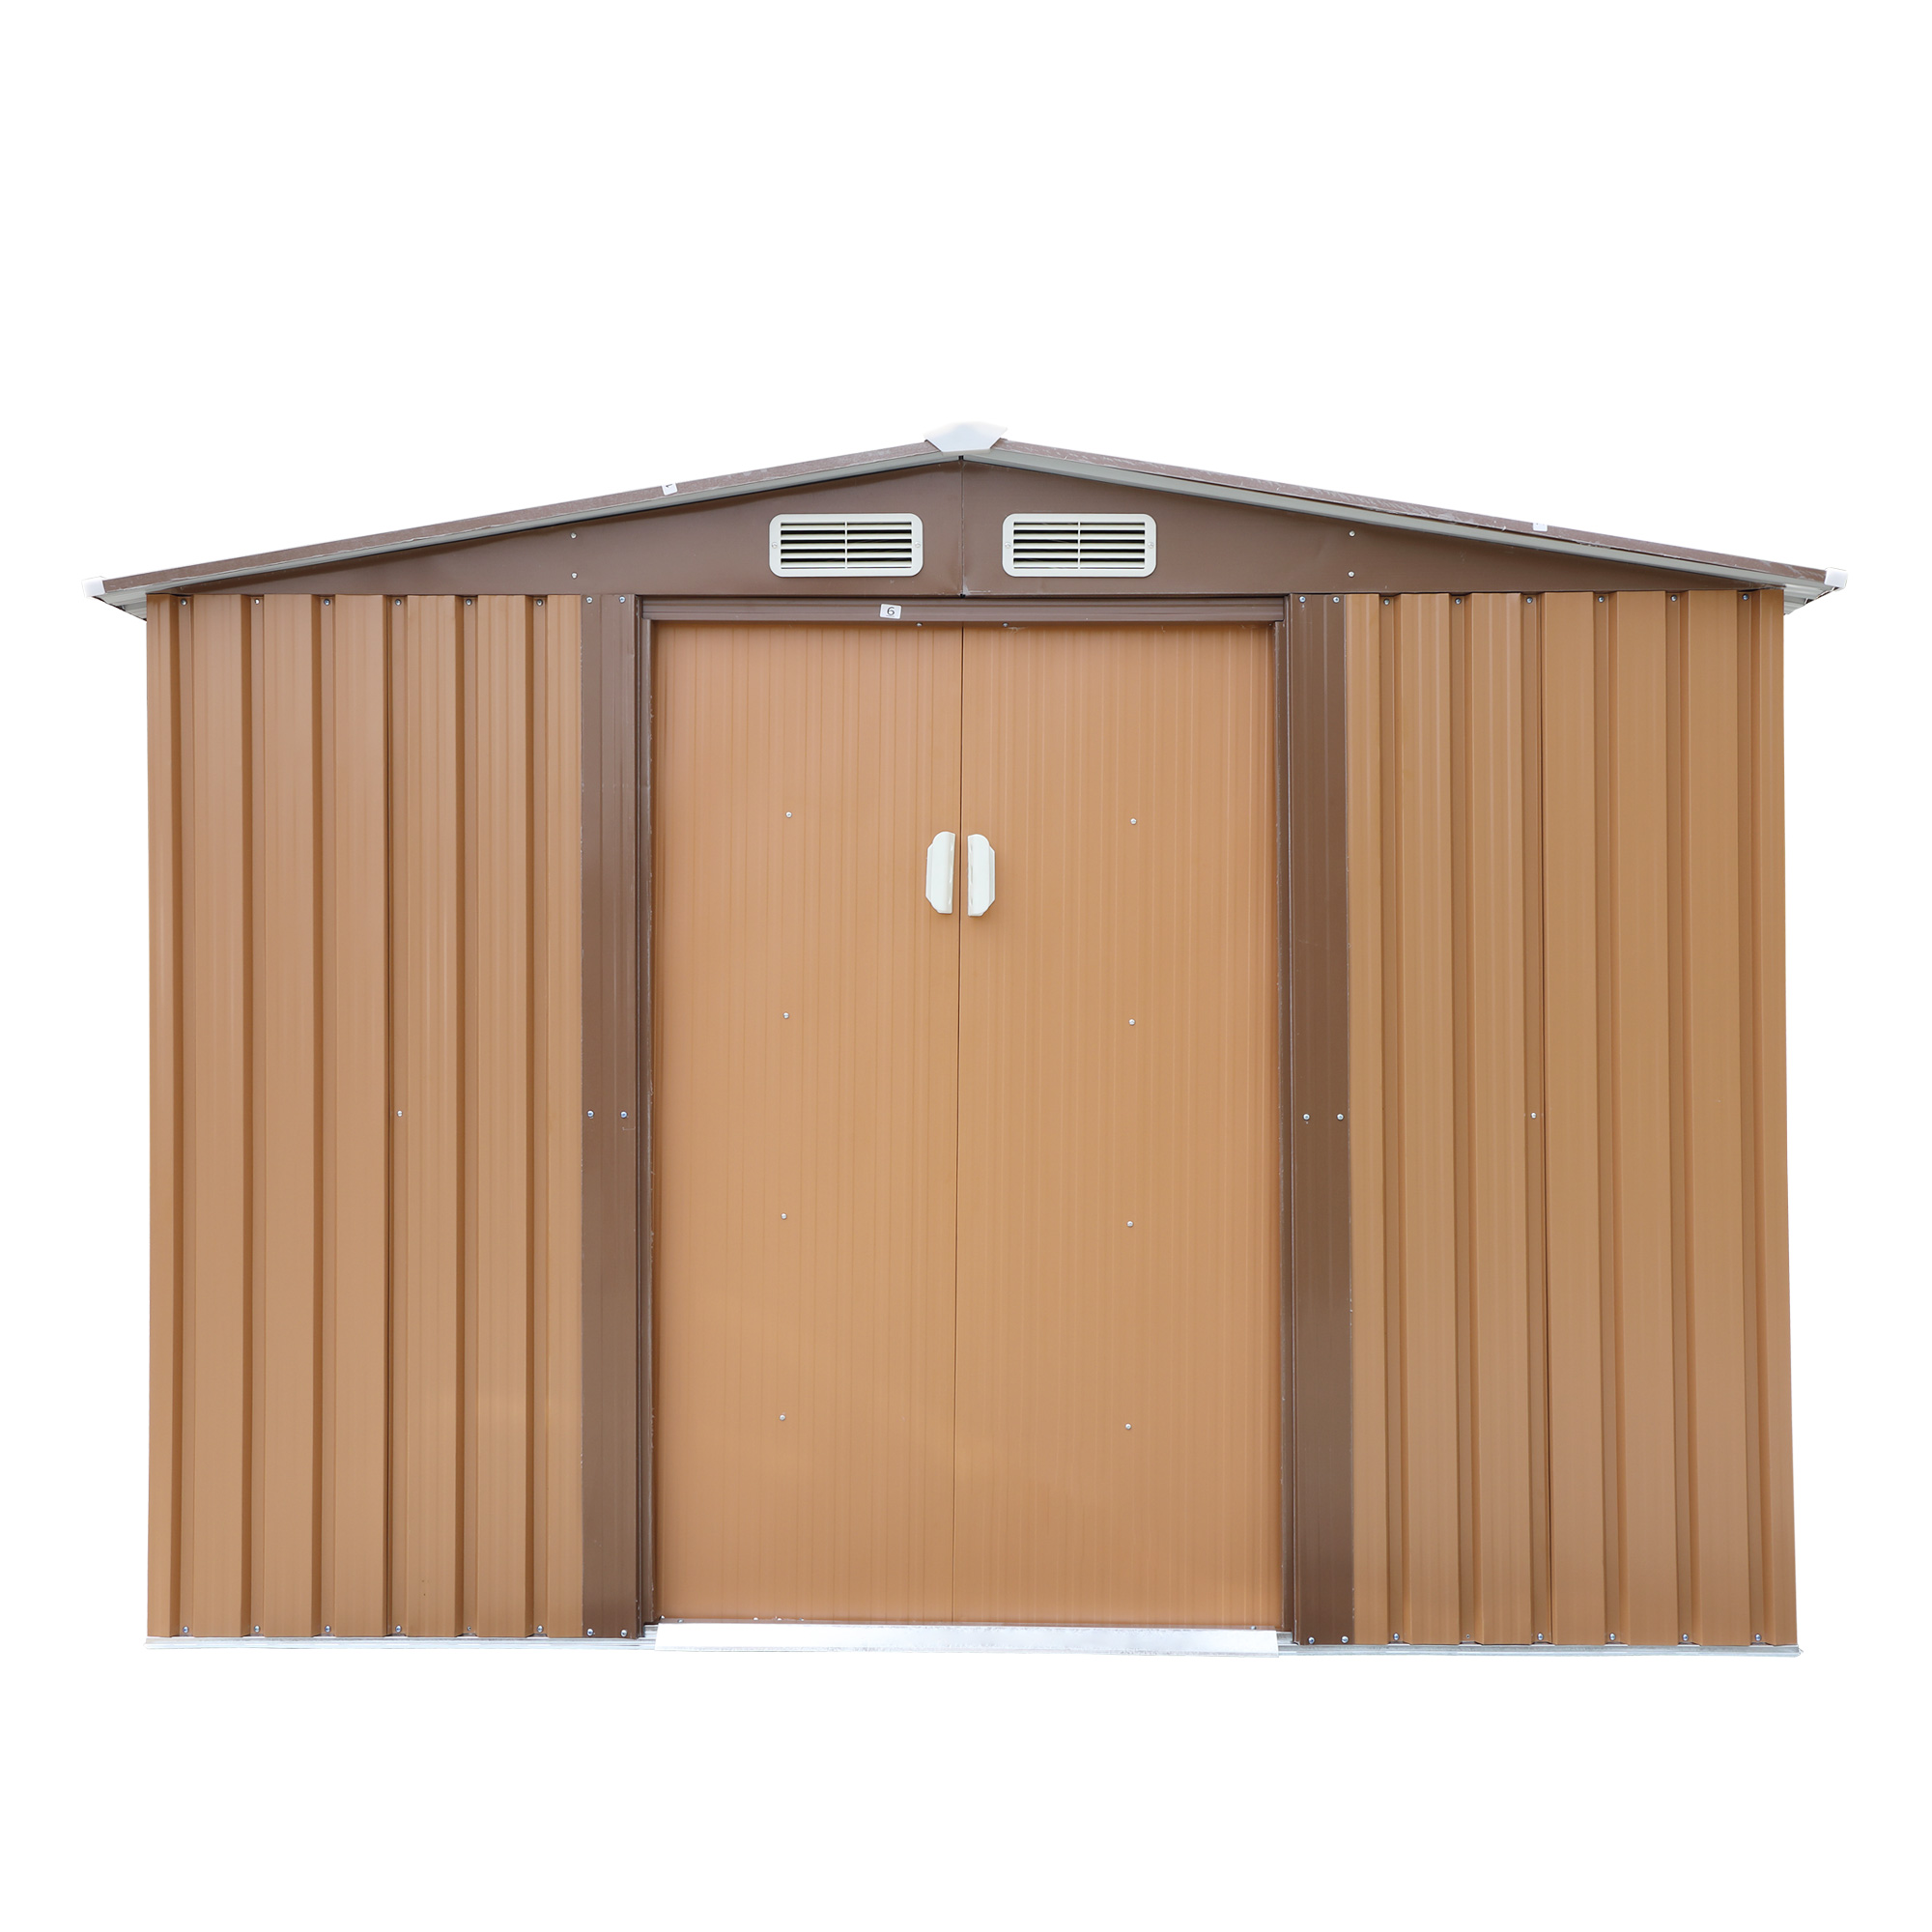 JAXPETY 6' x 8' Garden Tool Storage Utility Shed Outdoor House Galvanized Steel w/Sliding Door, 4 Vents, Brown